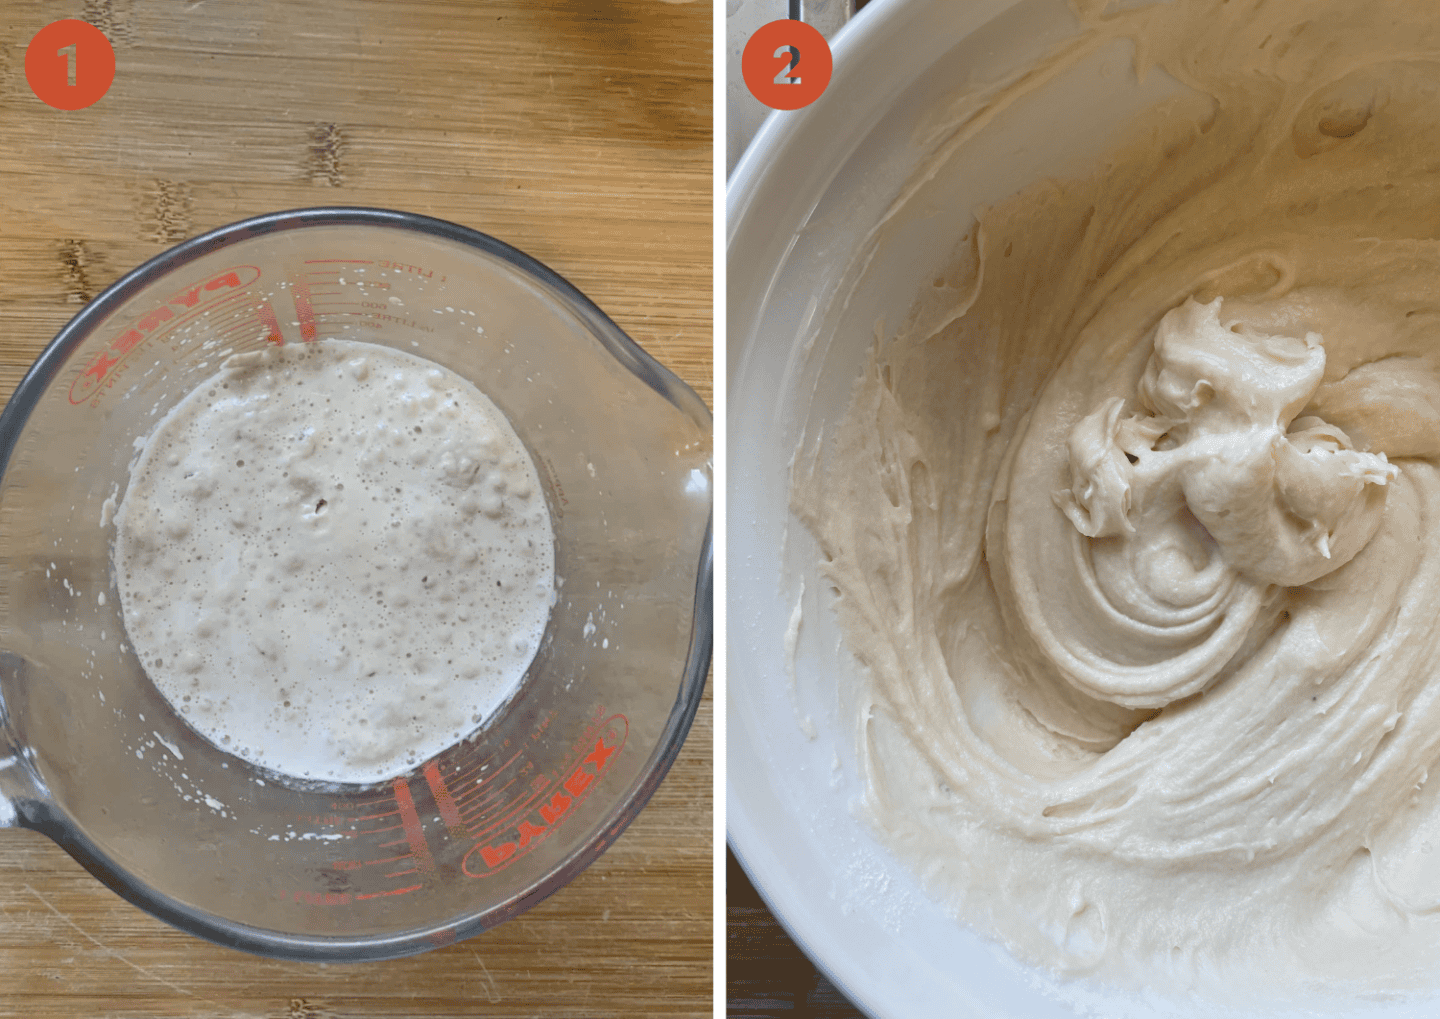 (Left) the frothy, activated yeast and (right) the gluten free bread dough.